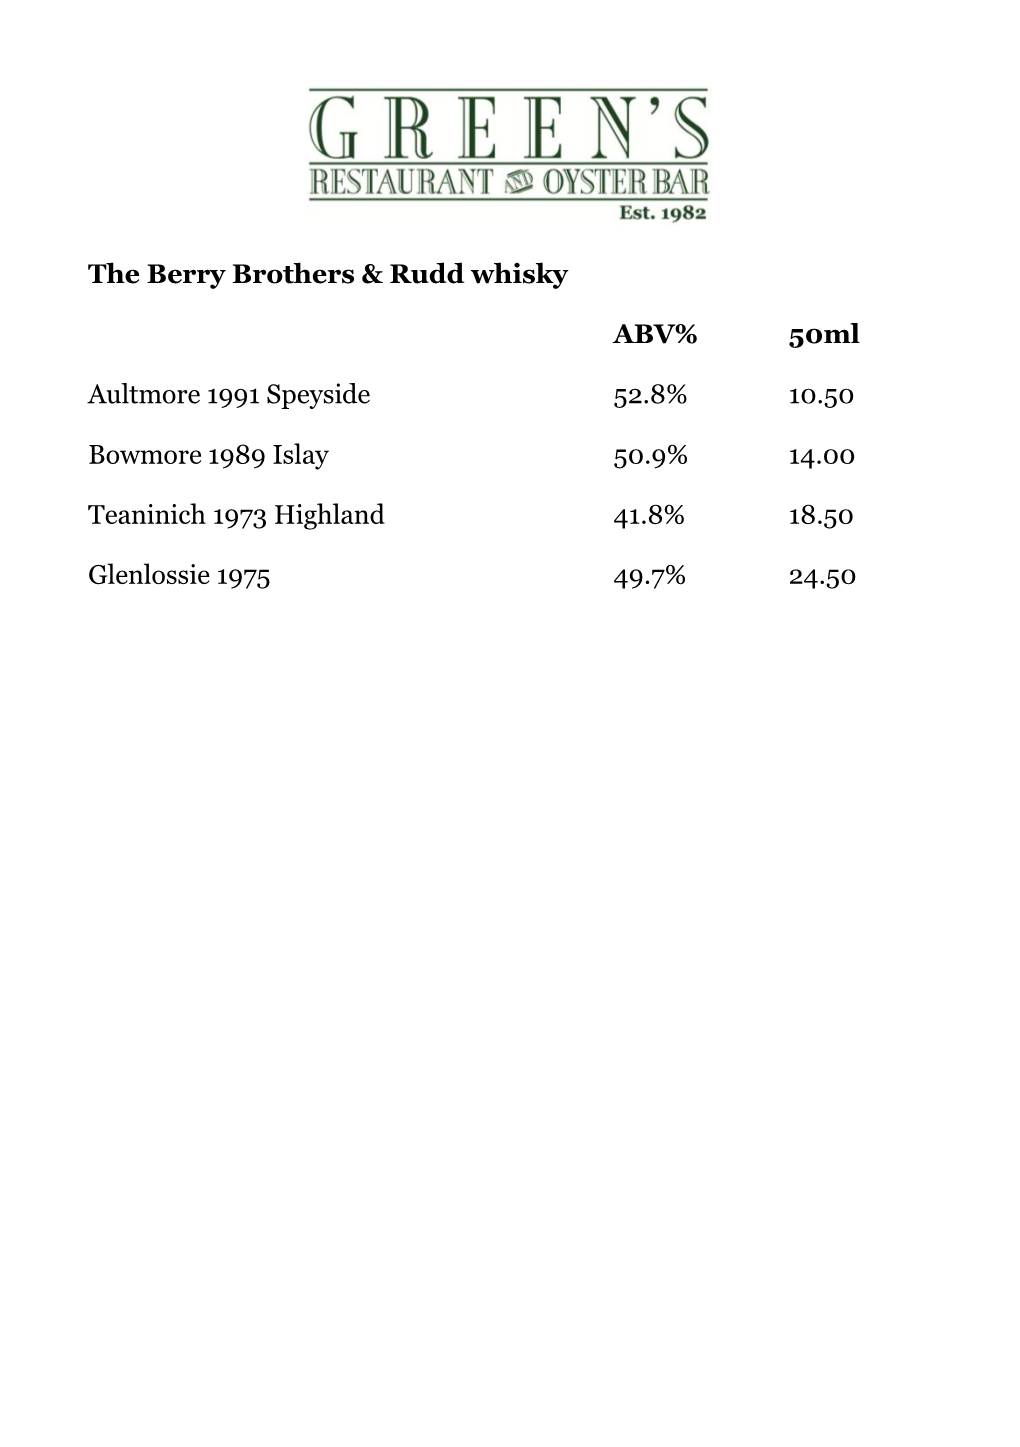 The Berry Brothers & Rudd Whisky ABV% 50Ml Aultmore 1991 Speyside 52.8% 10.50 Bowmore 1989 Islay 50.9% 14.00 Teanini